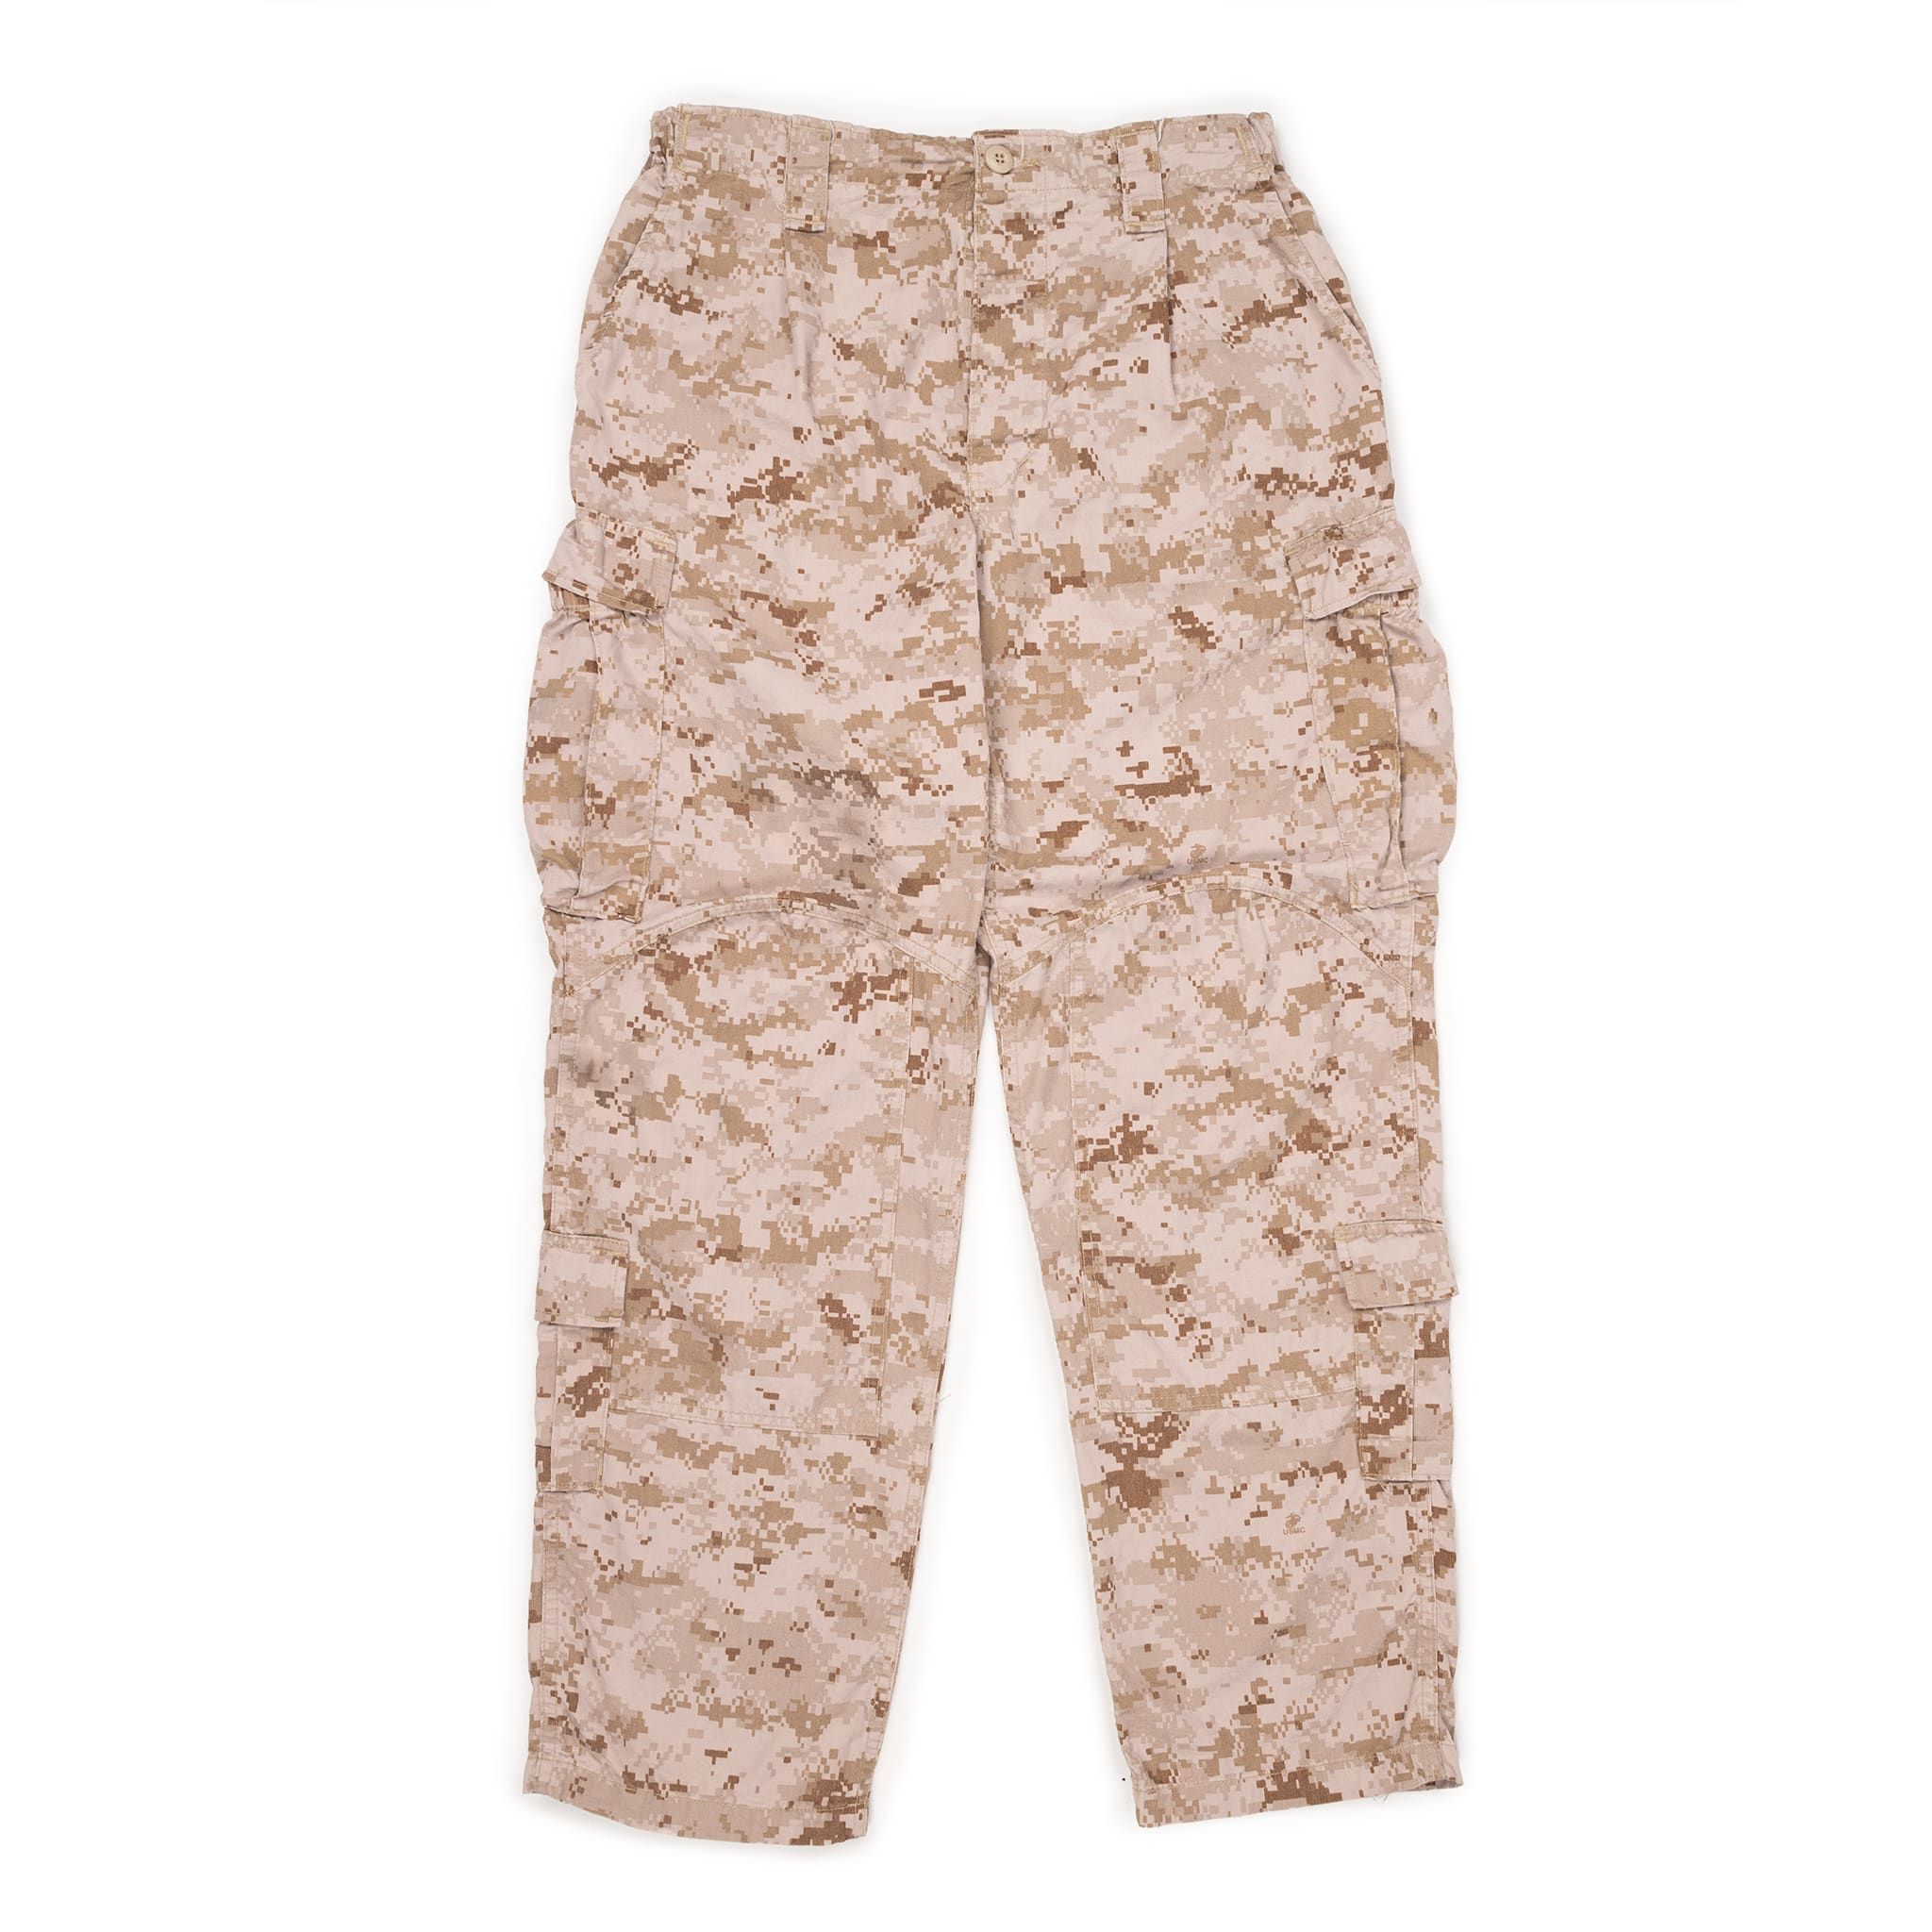 US Military, Pants, Desert Camo Cargo Pants Us Army Surplus Camouflage  Trousers Size Medreg